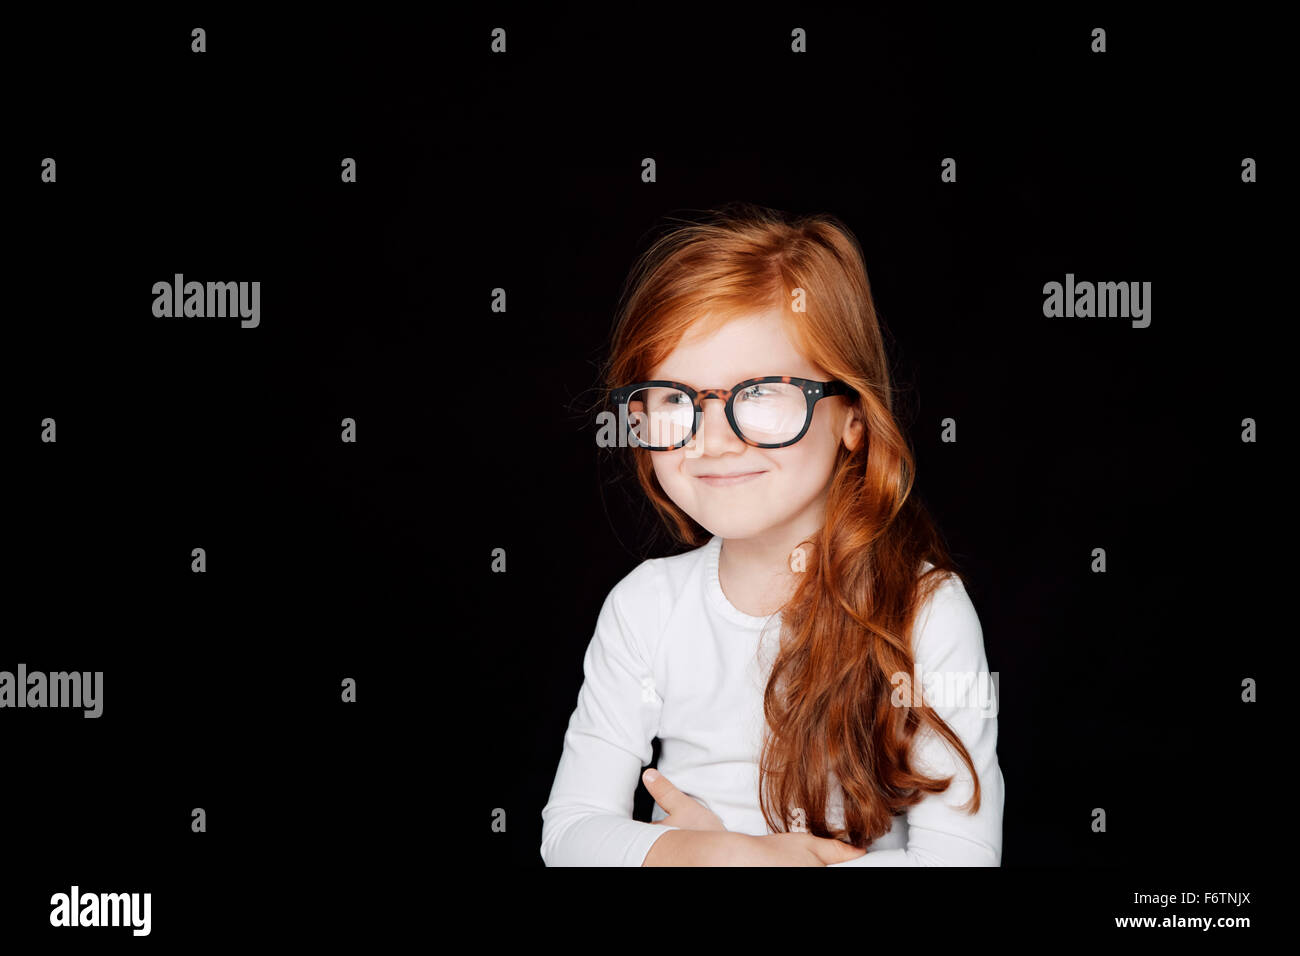 Portrait of redheaded smiling little girl wearing oversized glasses in front of black background Stock Photo